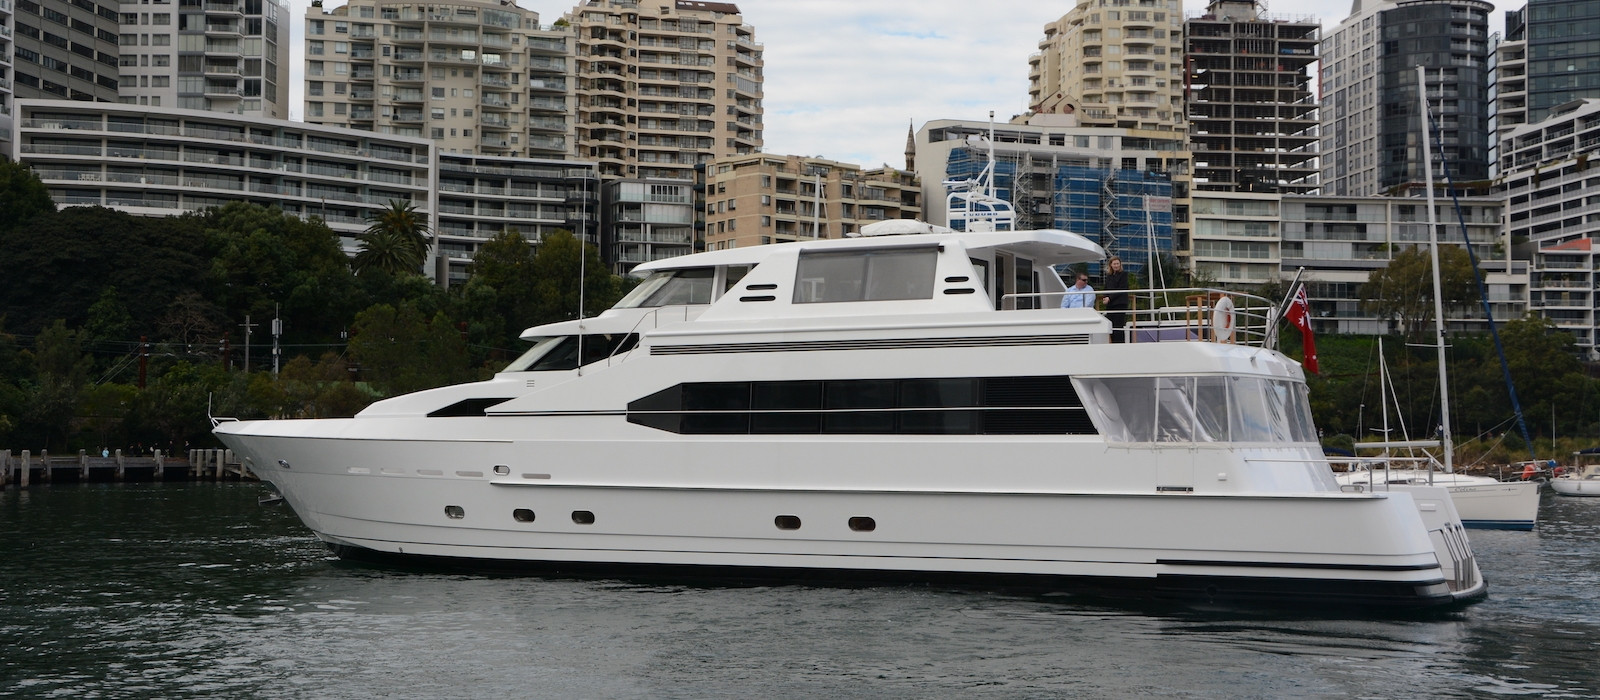 Side profile view of AQA luxury boat hire at Lavender Bay